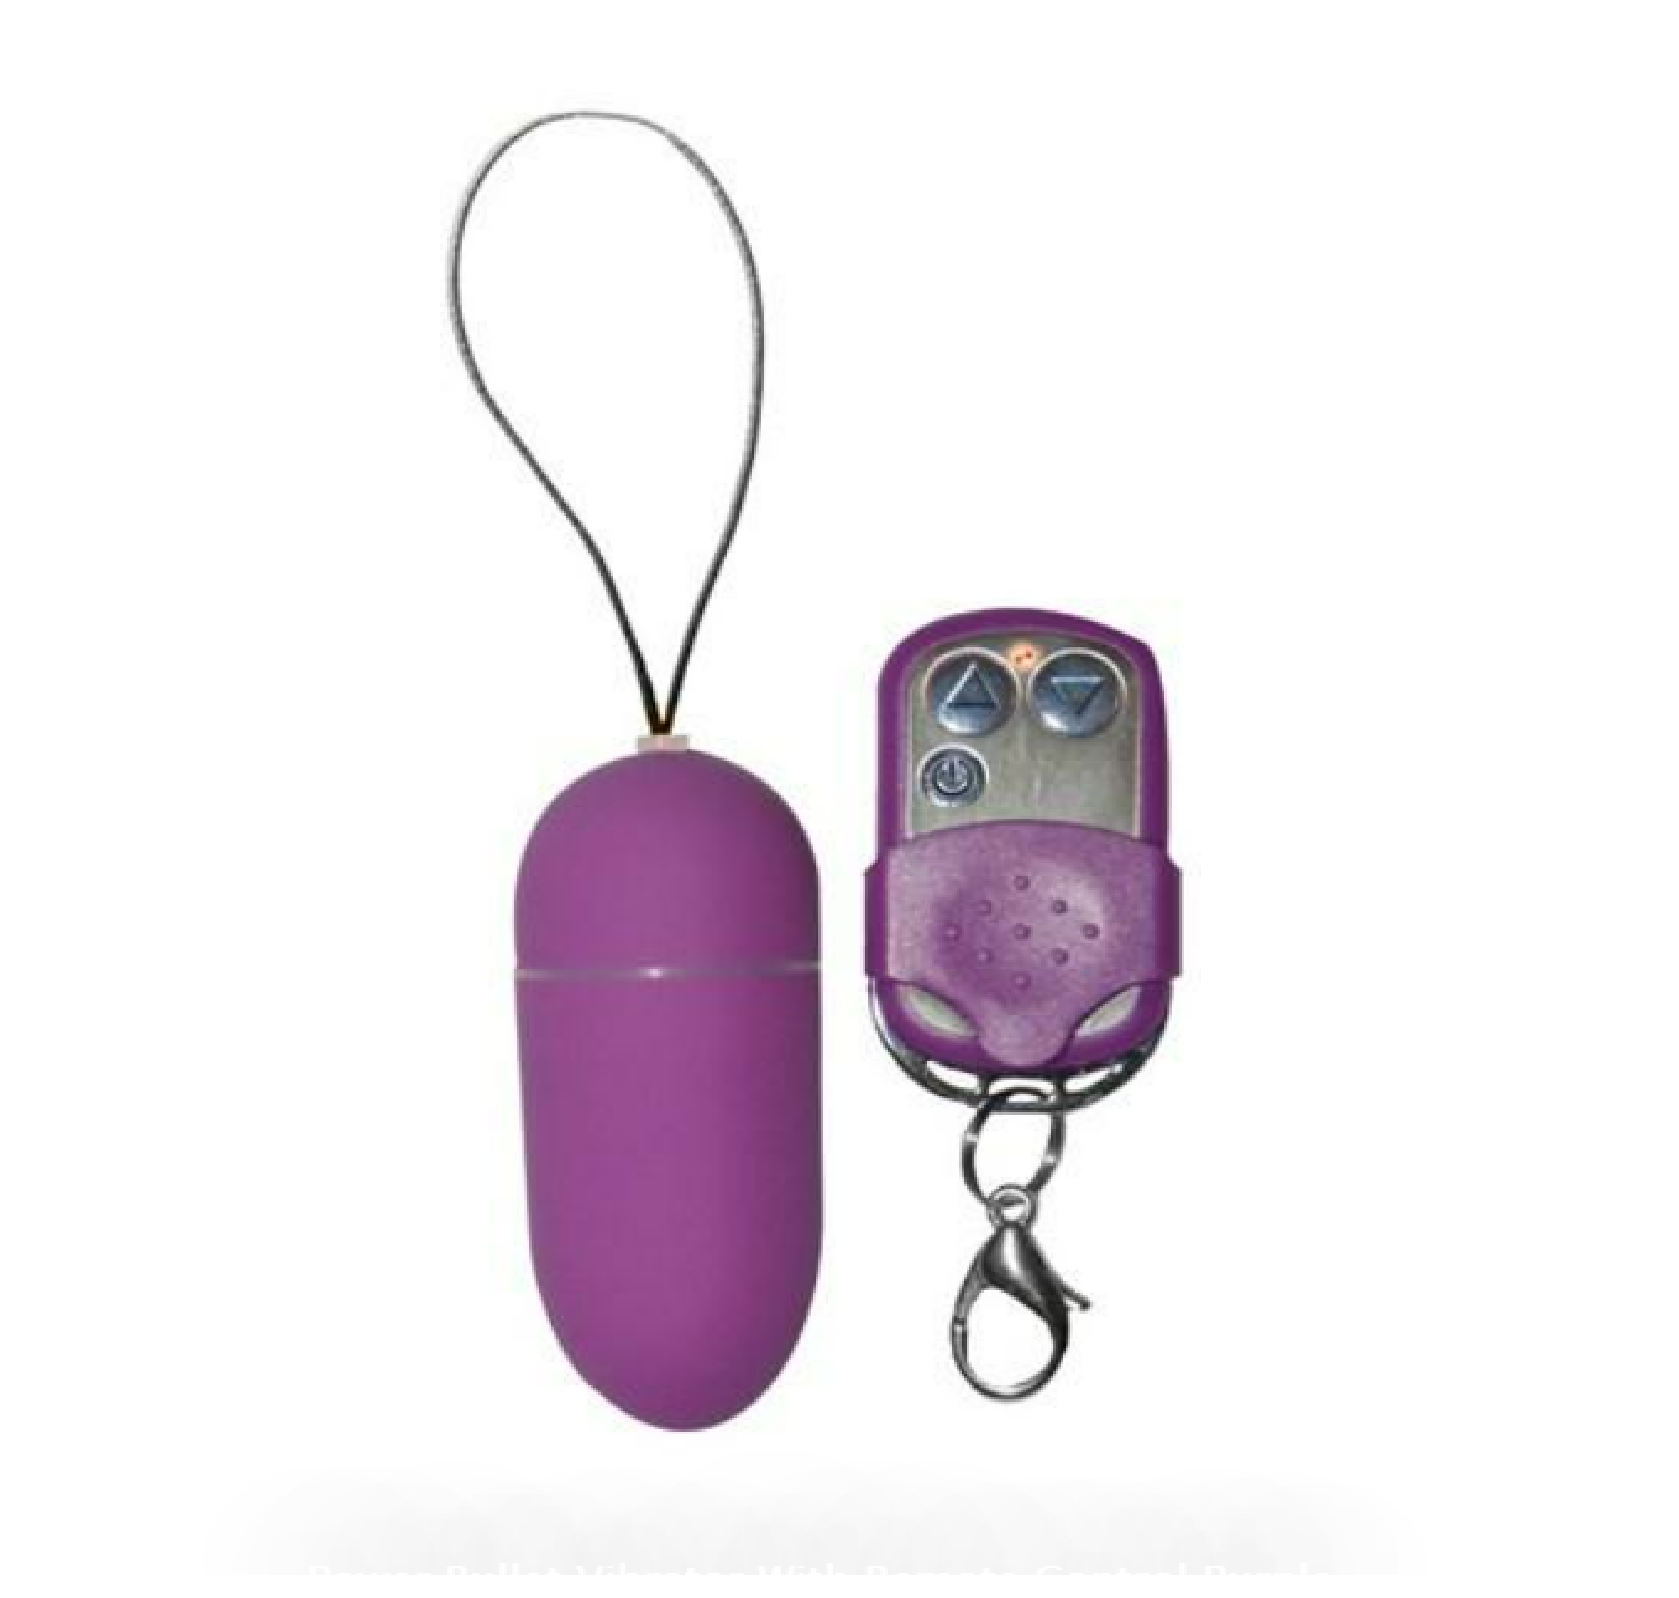 Power Bullet Vibrator With Remote Control - Purple